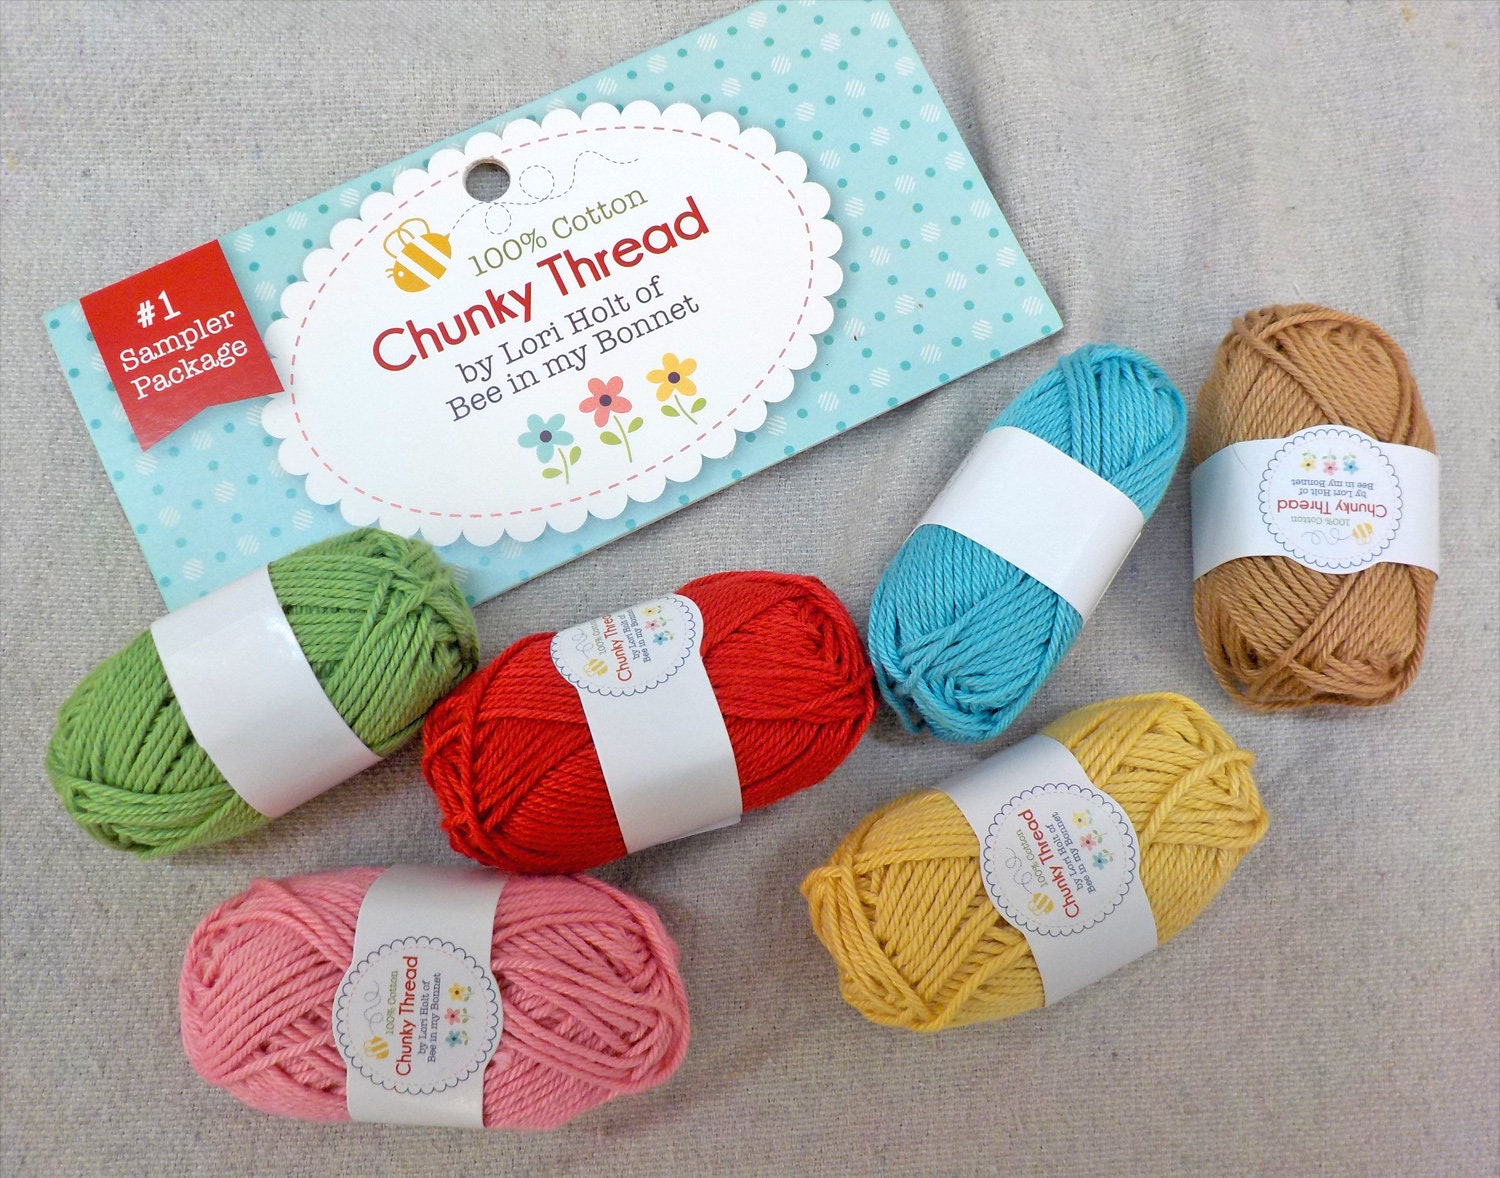 Chunky Thread by Lori Holt of Bee in my Bonnetsampler pack #1, 6 skeins,  10 grams each